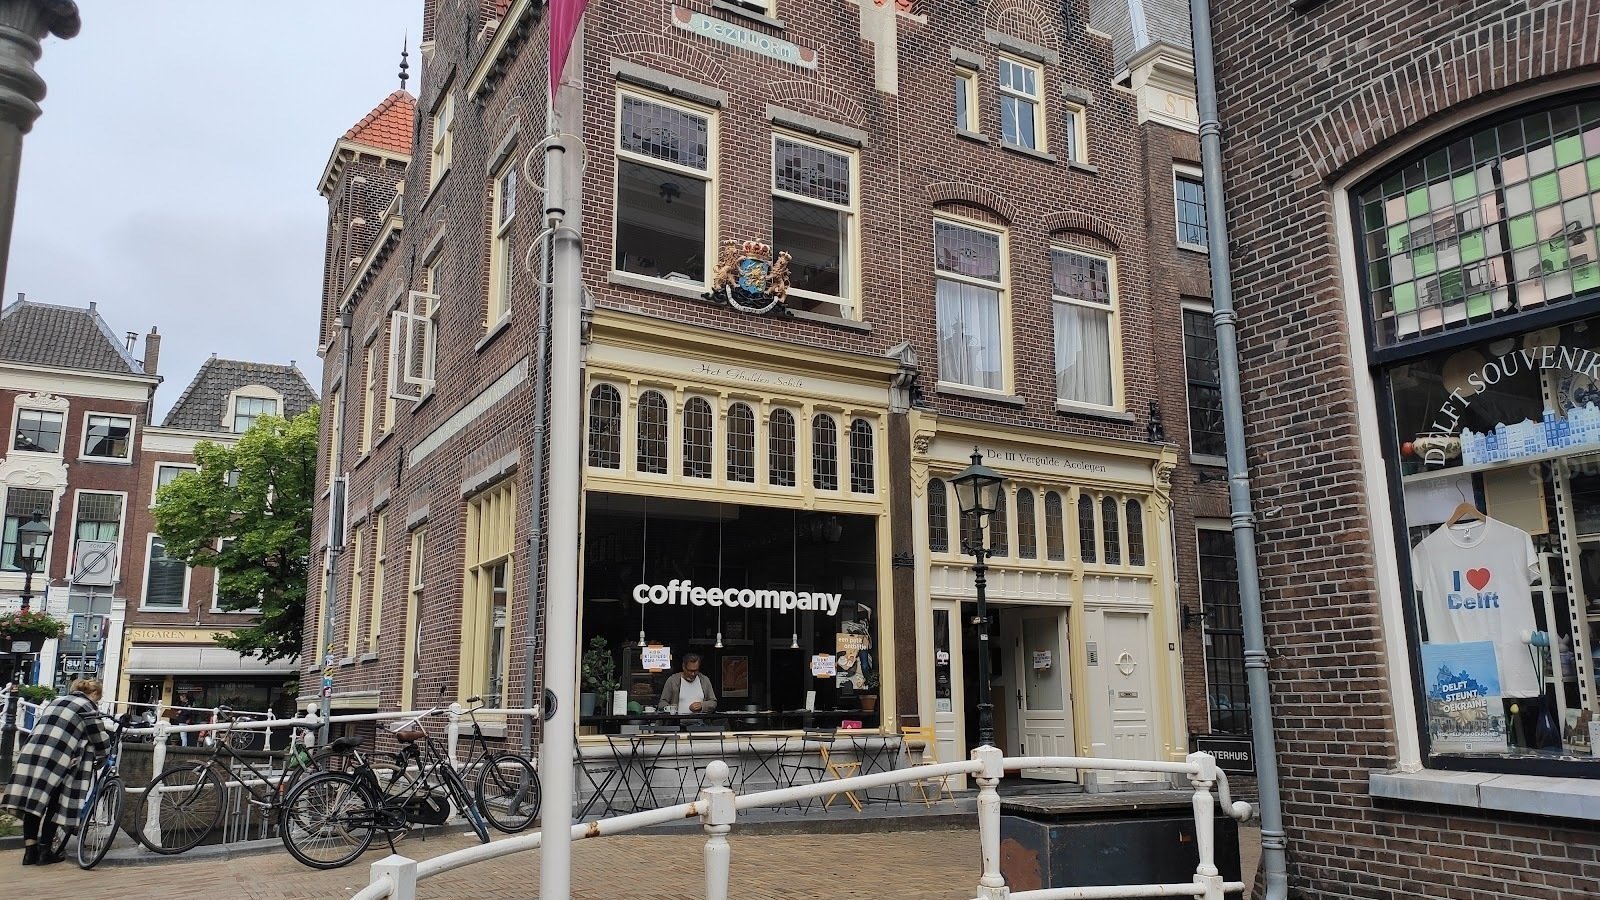 <span class="translation_missing" title="translation missing: en.meta.location_title, location_name: coffeecompany @ Markt 19, city: Delft">Location Title</span>